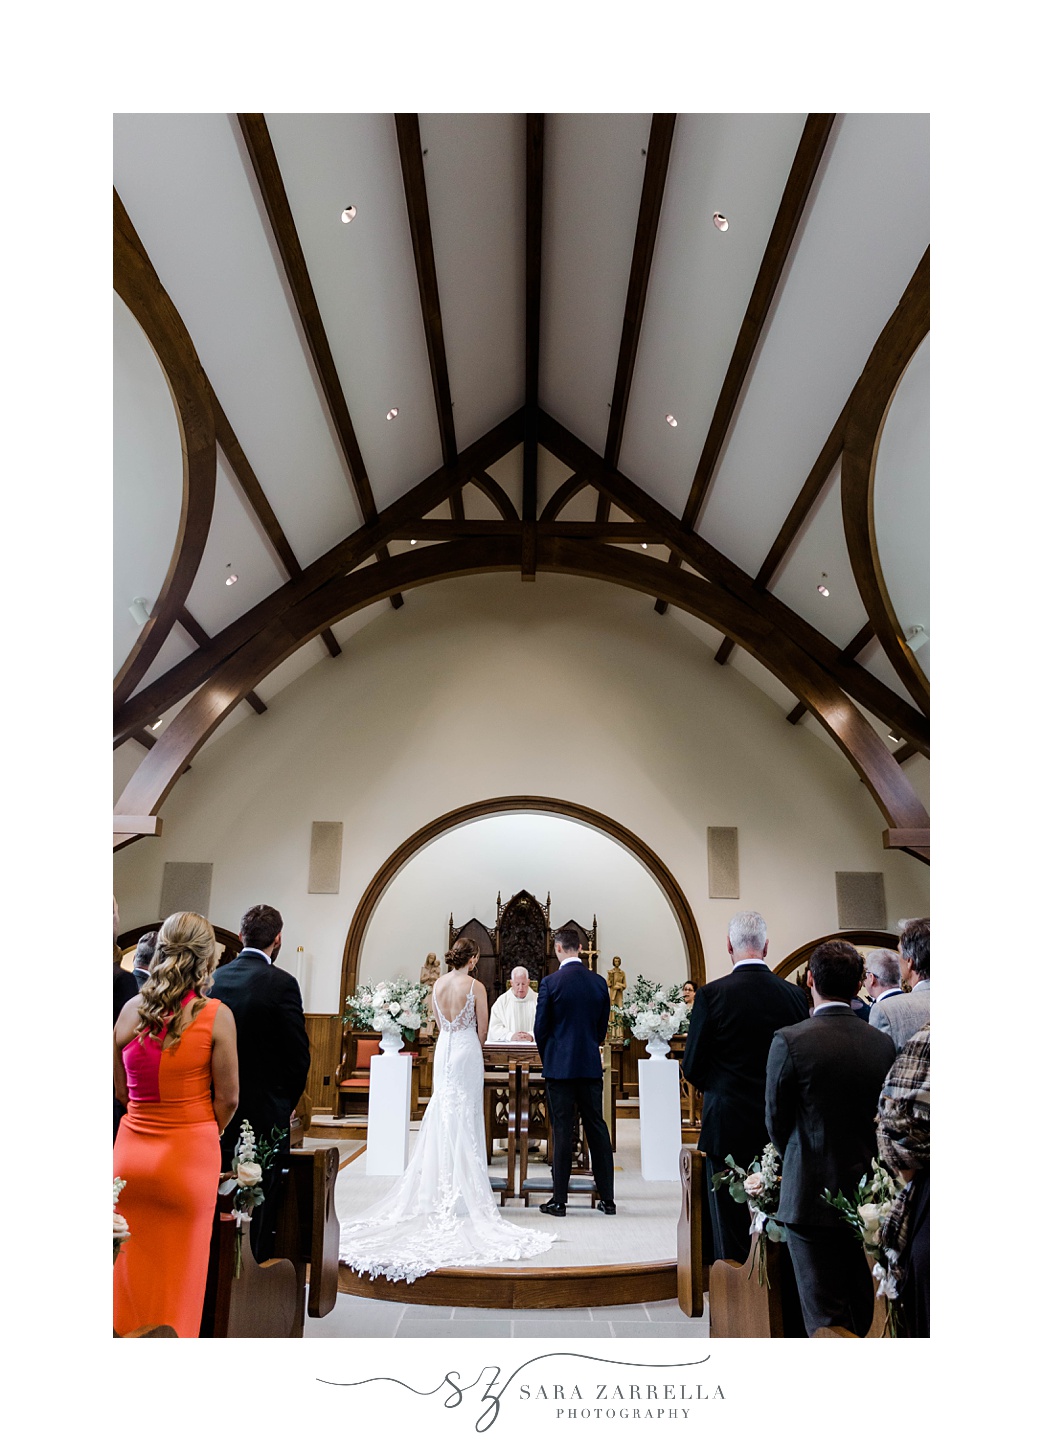 bride and groom stands together during wedding ceremony at Our Lady of Mercy Chapel at Salve Regina University